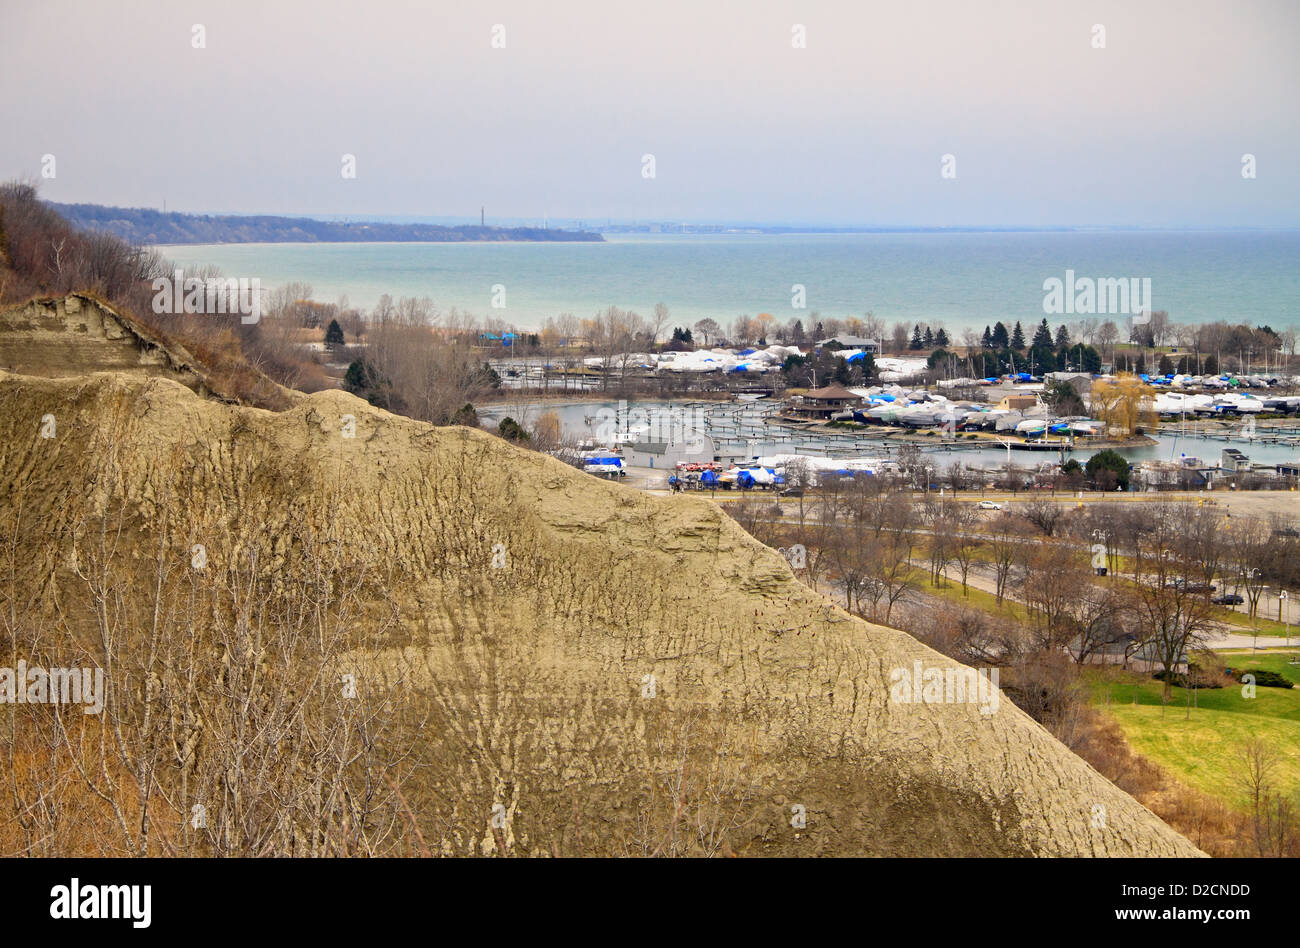 Landscape with eroded Scarborough Bluffs and Bluffers Park Yacht Club and marinas Stock Photo